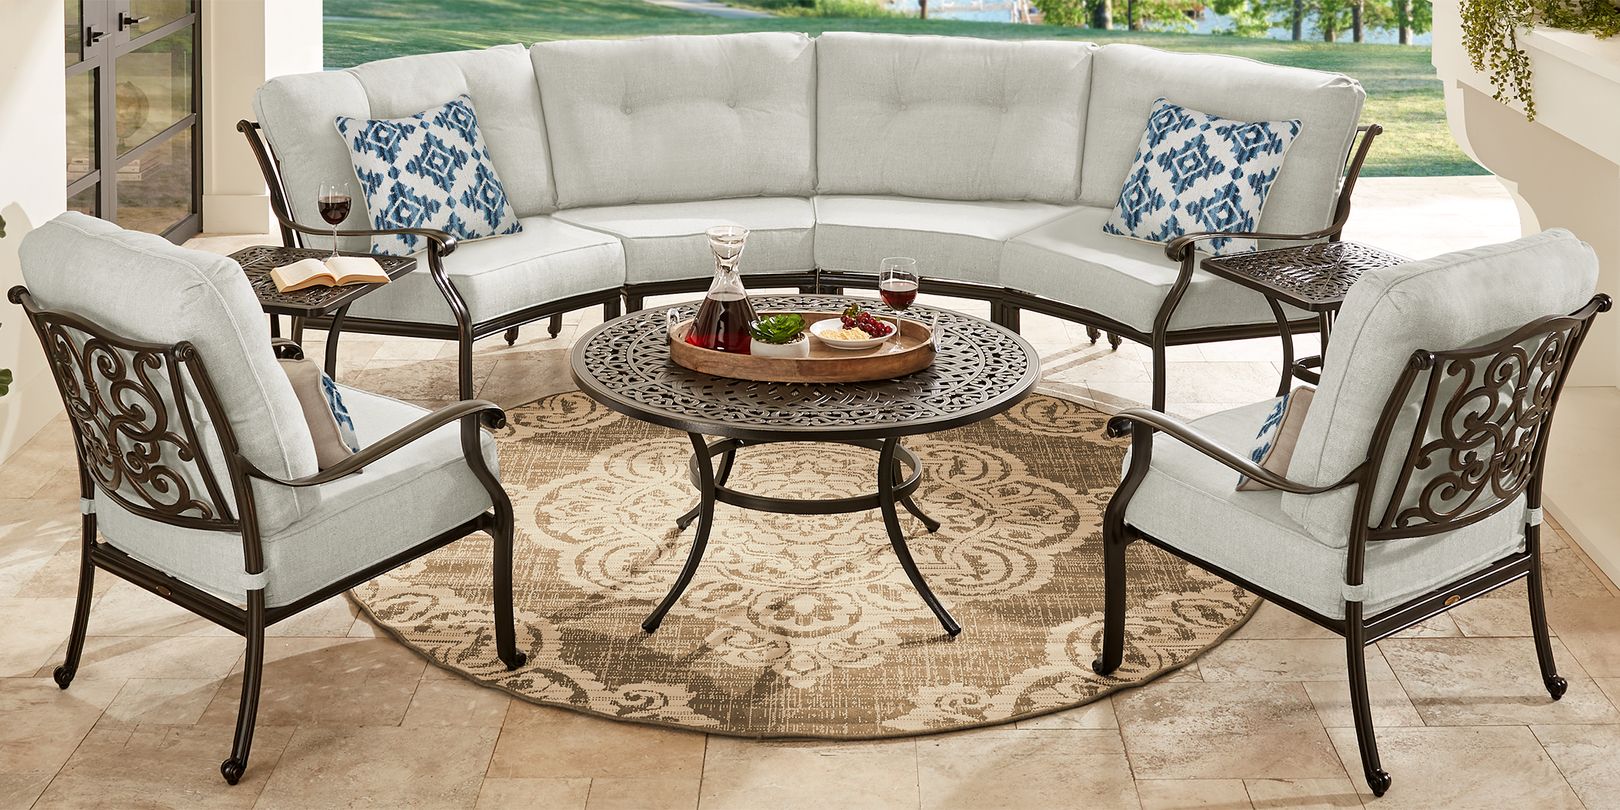 Photo of outdoor sectional with gray cushions set atop a beige rug